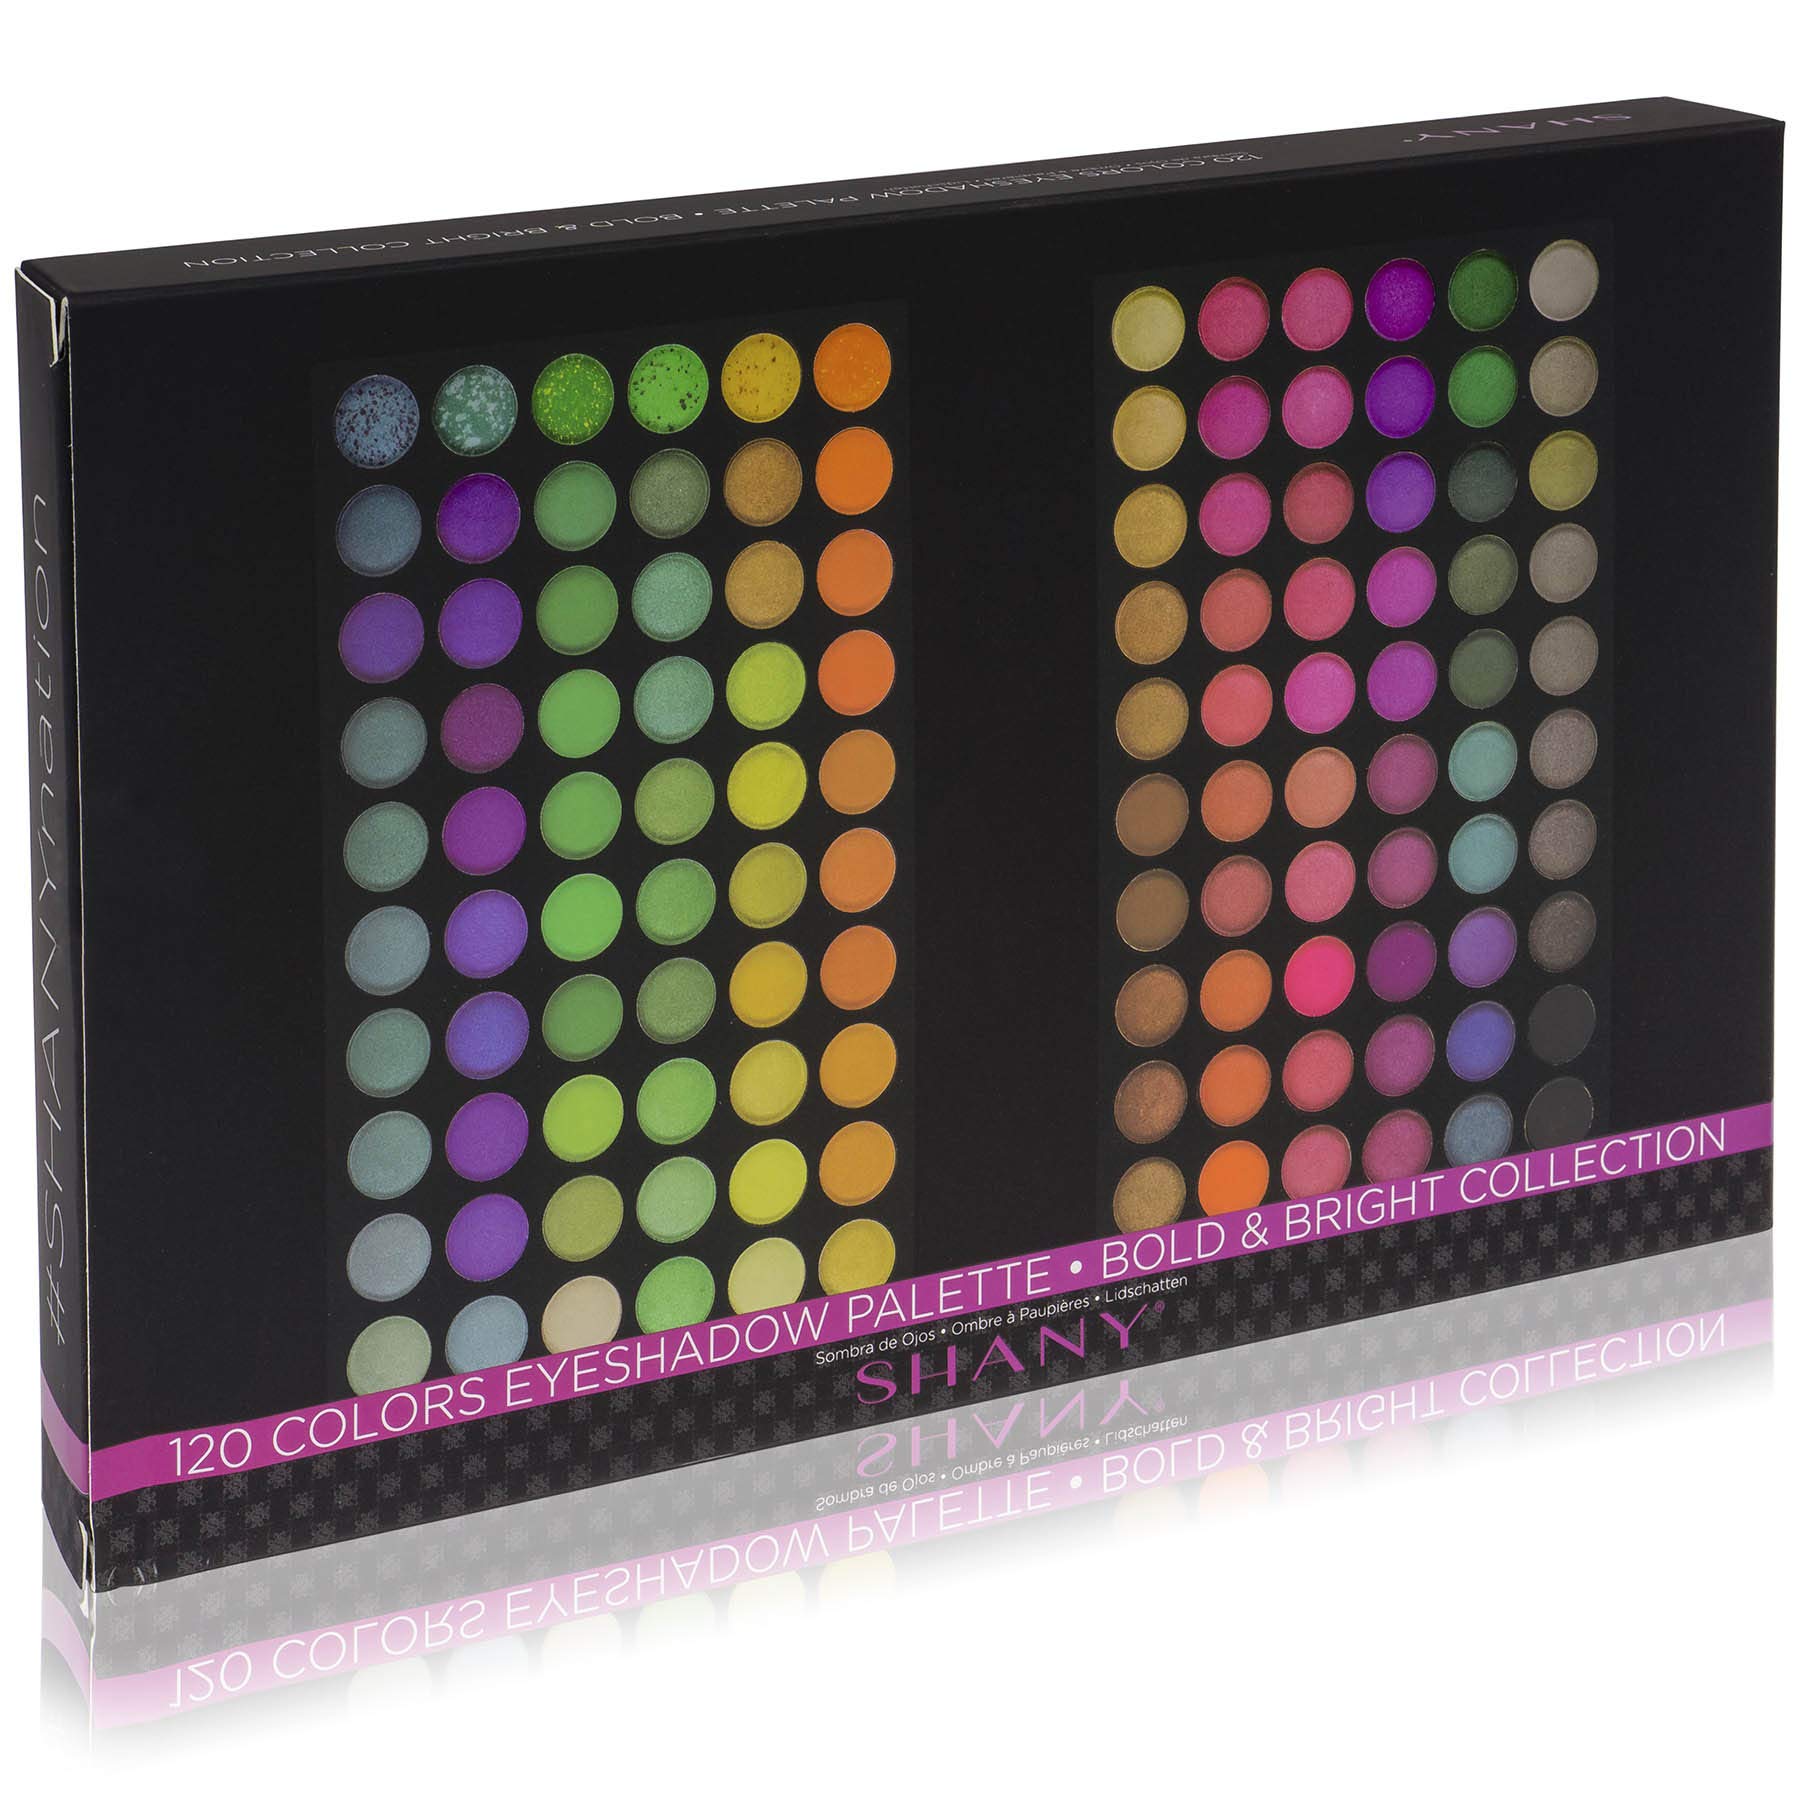 SHANY 120 Colors Highly Pigmented Long Lasting Blendable Natural Colors Eye shadow Palette, Bold and Bright Collection, Vivid Colors